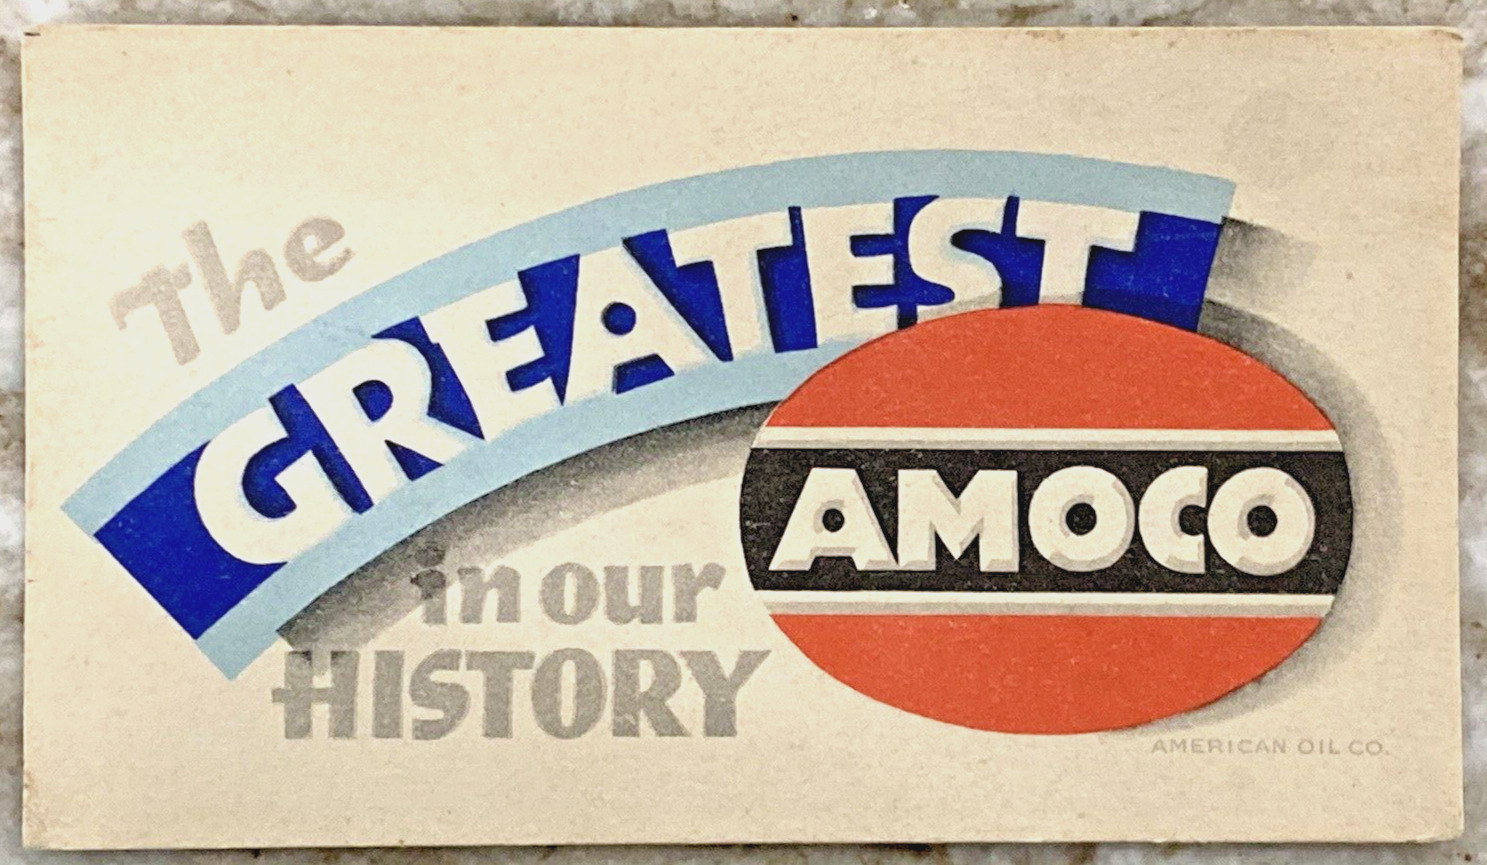 The Greatest in our History AMOCO Vintage Gas Oil Advertising Ink Blotter 1333